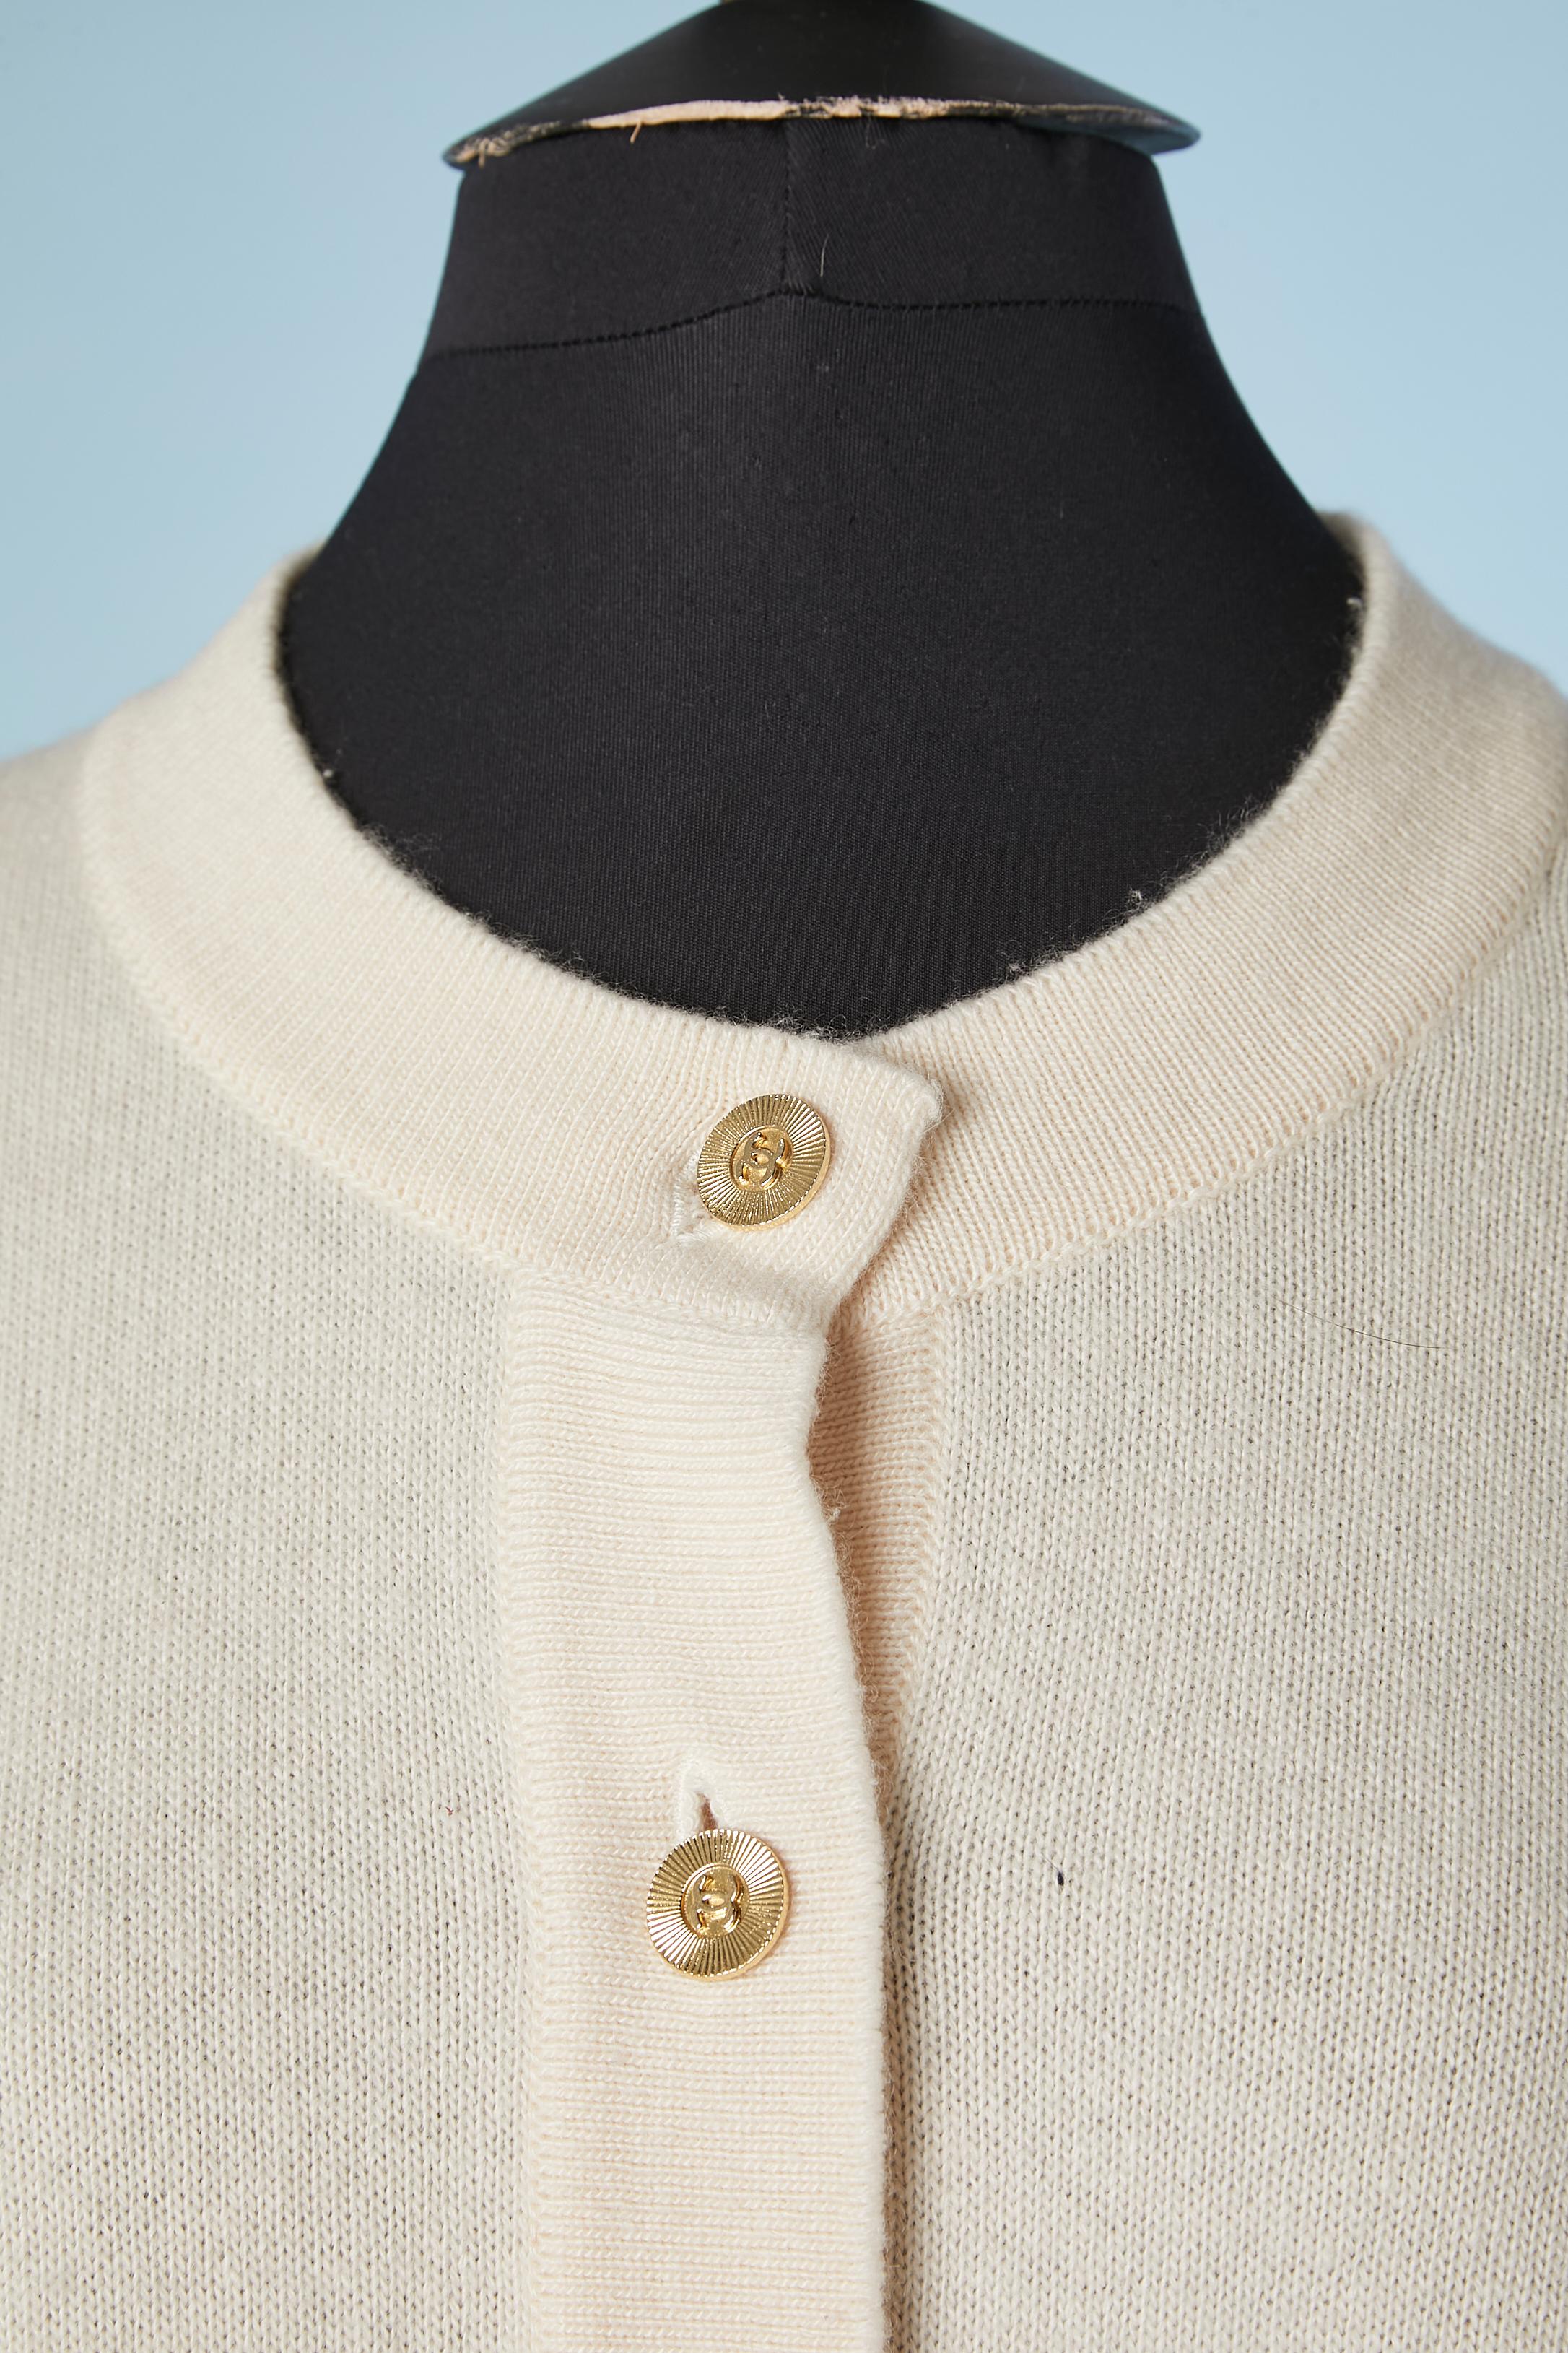 Ivory cape-cardigan in cashmere with branded gold metal buttons. Lenght in the middle front= 85 cm 
Lenght on the side = 65 cm 
Size : from M to XL 